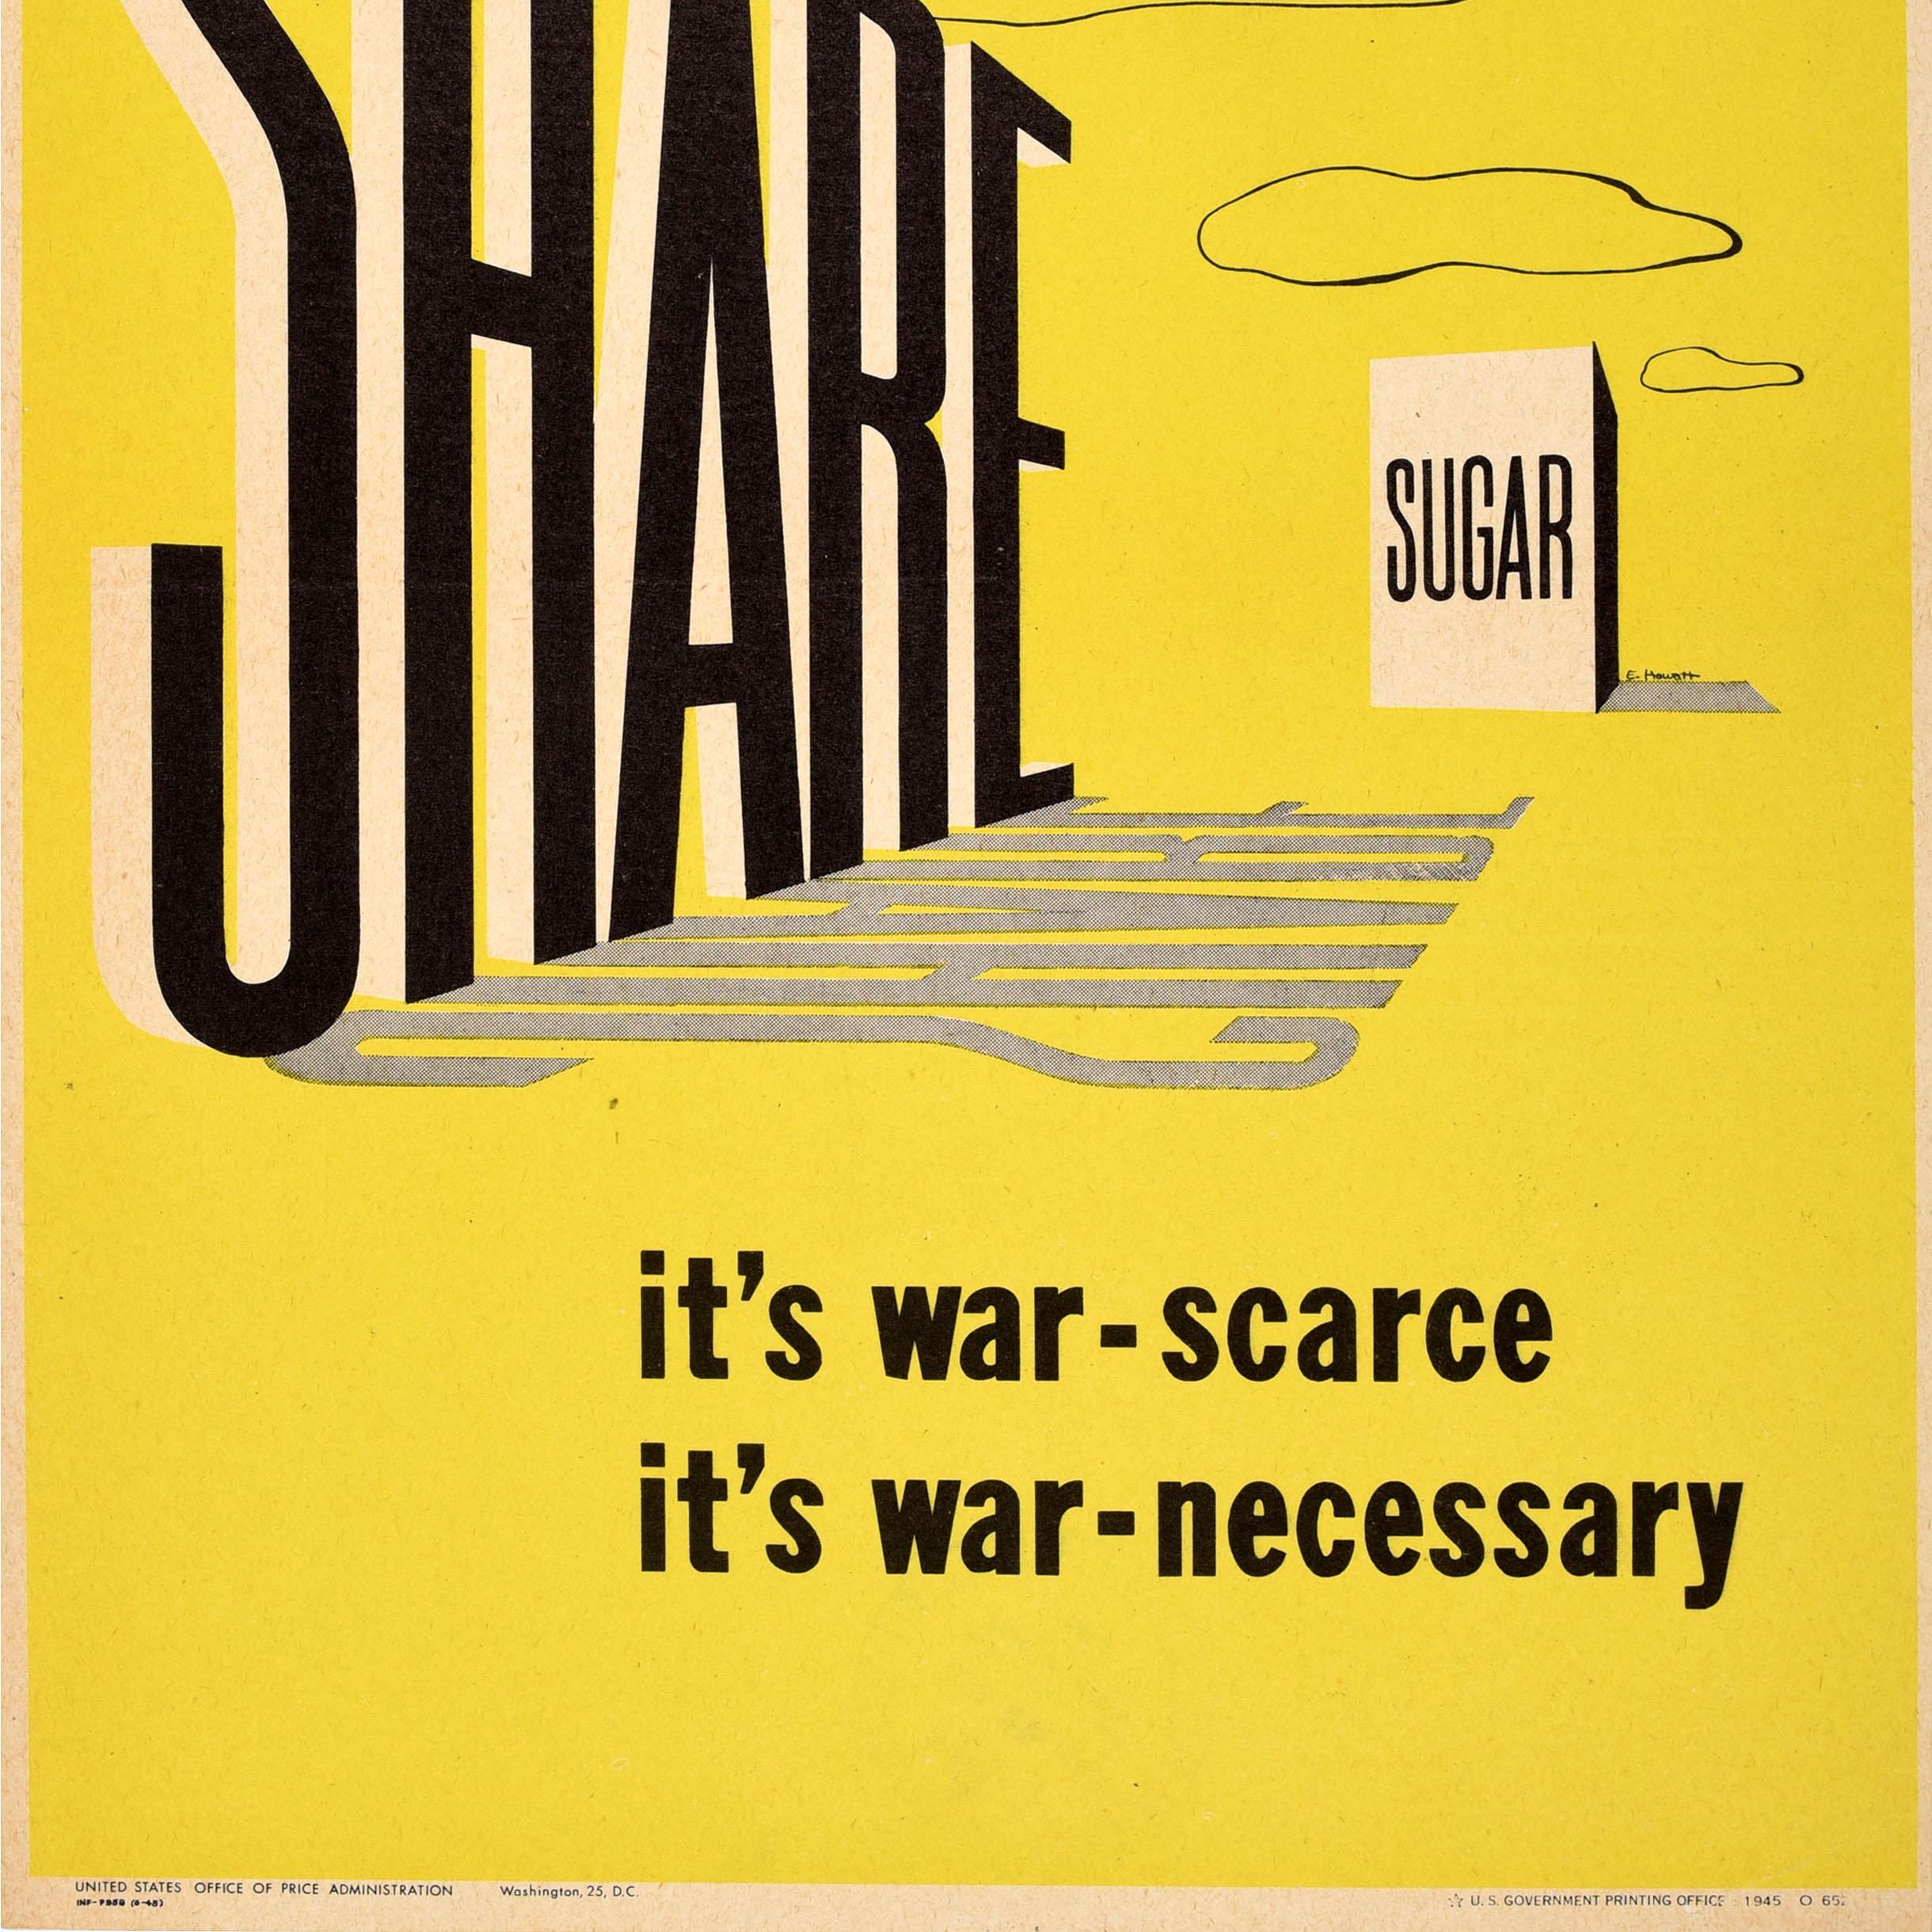 Original vintage World War Two Propaganda poster Share Sugar - It's war-scarce its war-necessary - Design features a box of sugar on a yellow background with bold black lettering. Issued by the United states Office of Price Administration. Printed